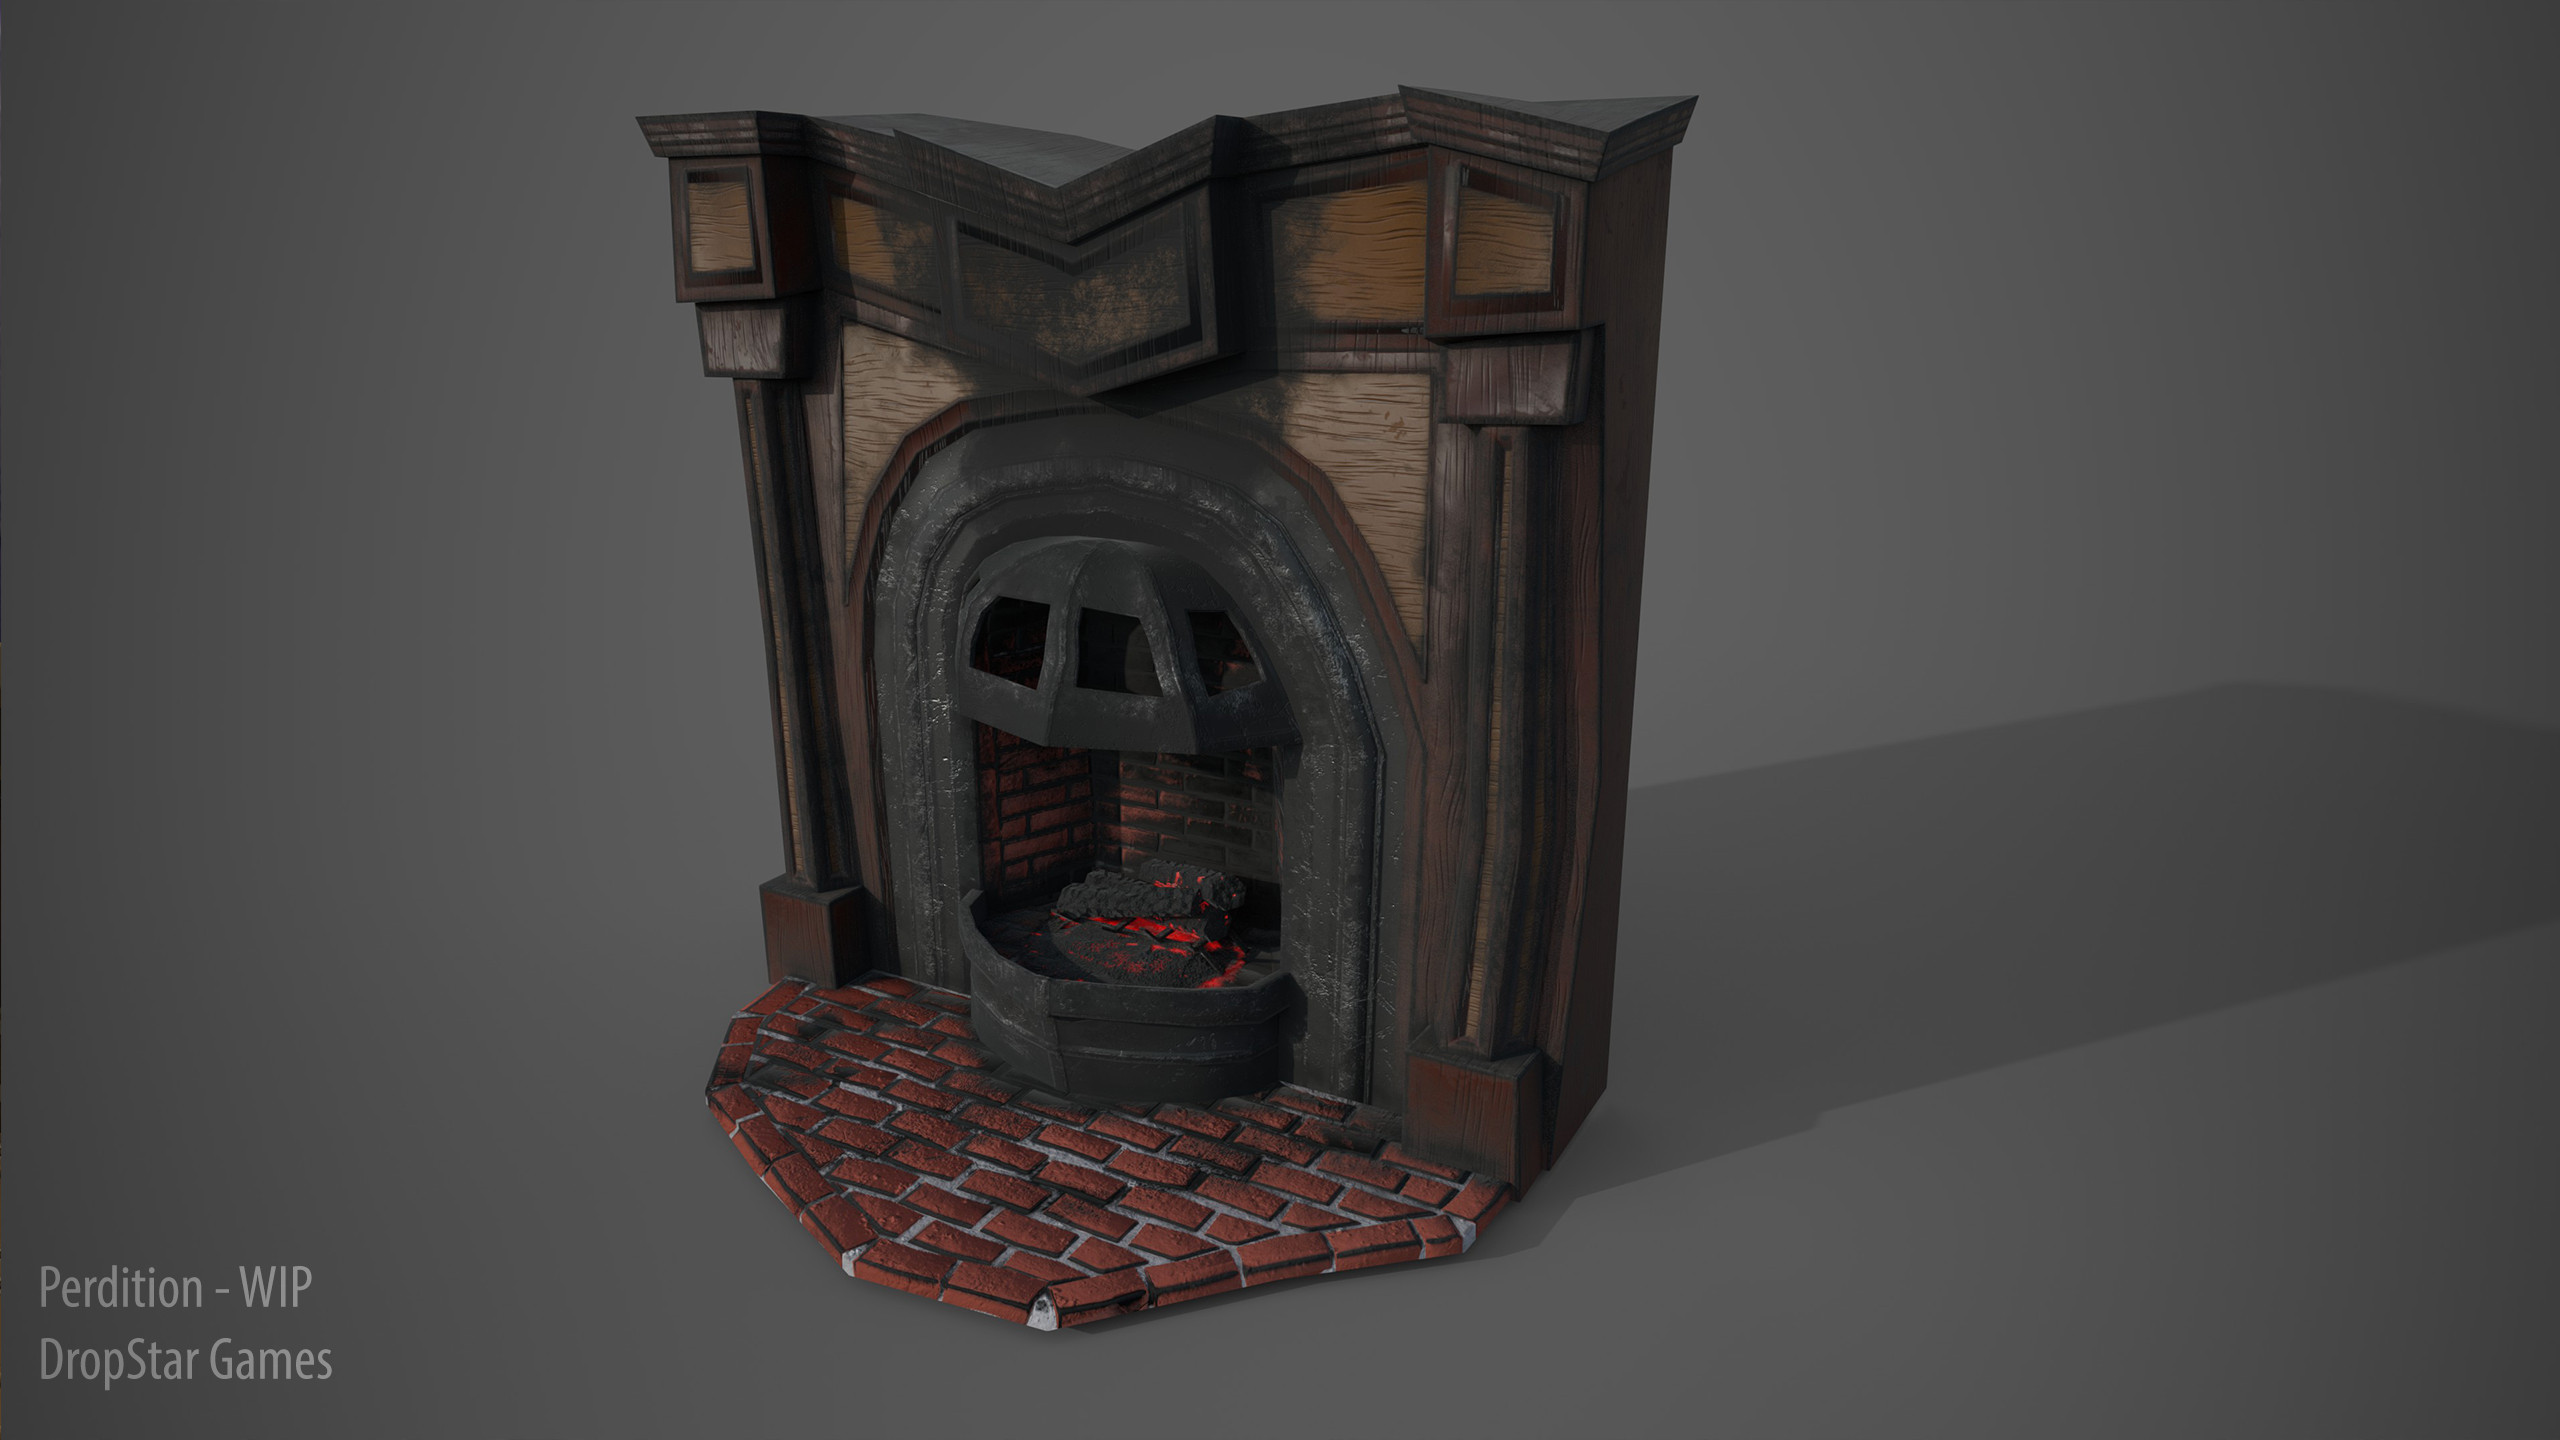 Fireplace - Rendered in Iray